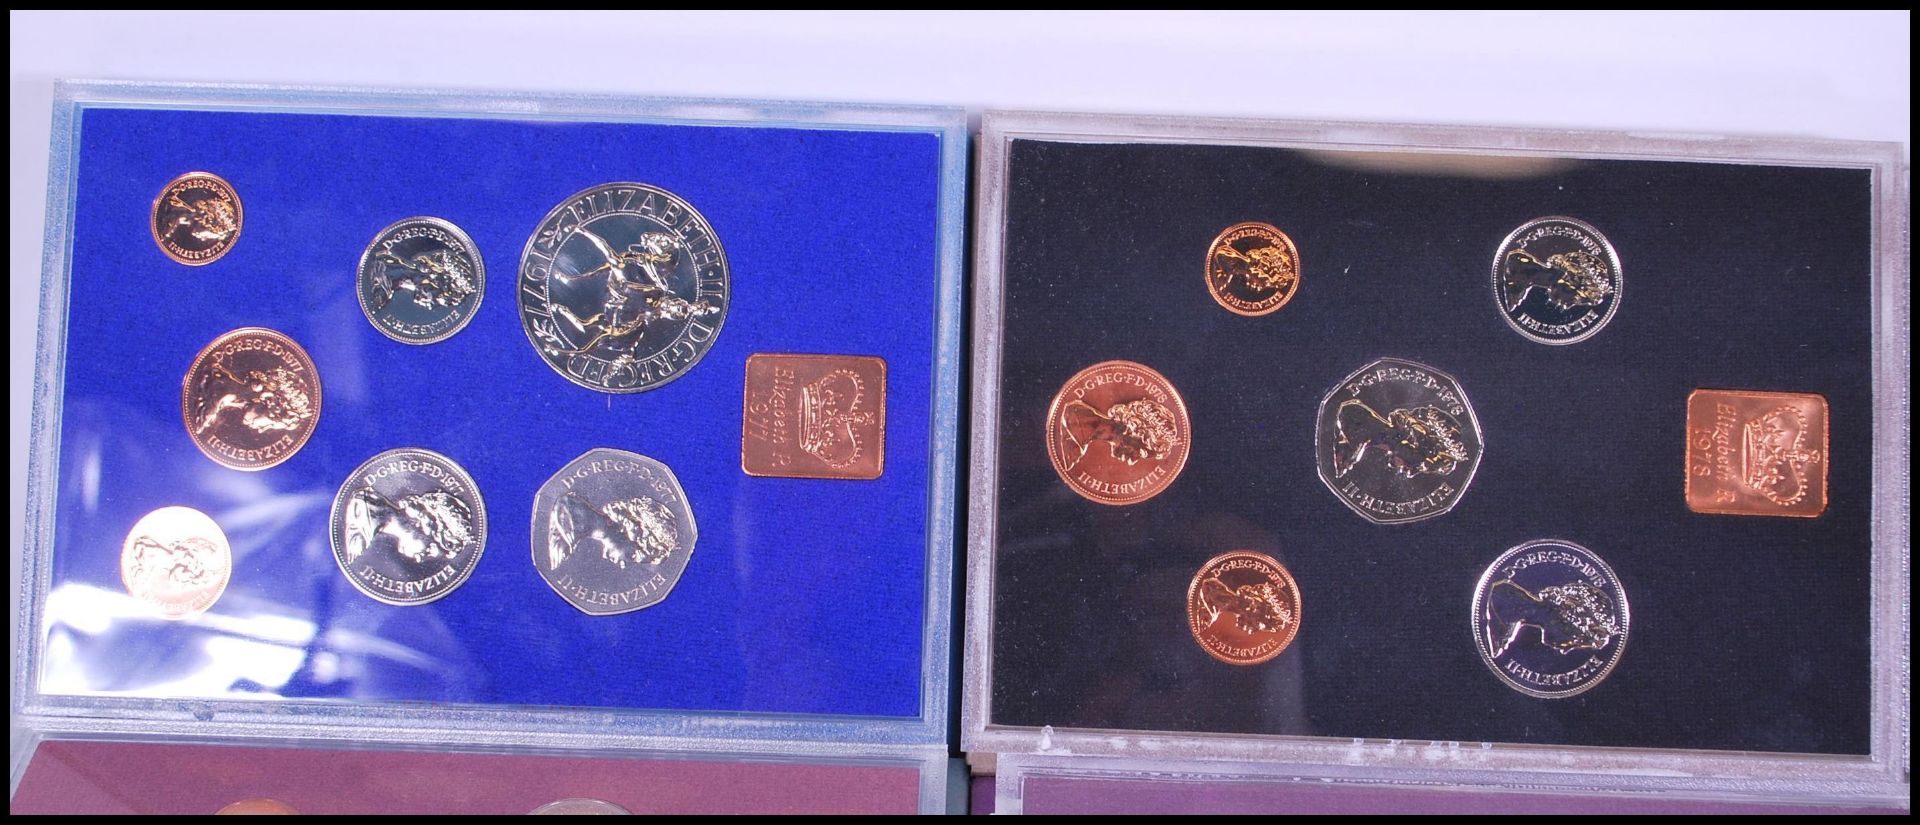 A collection of Royal Mint Coinage of Great Britain and Ireland commemorative annual coin sets to - Bild 2 aus 9